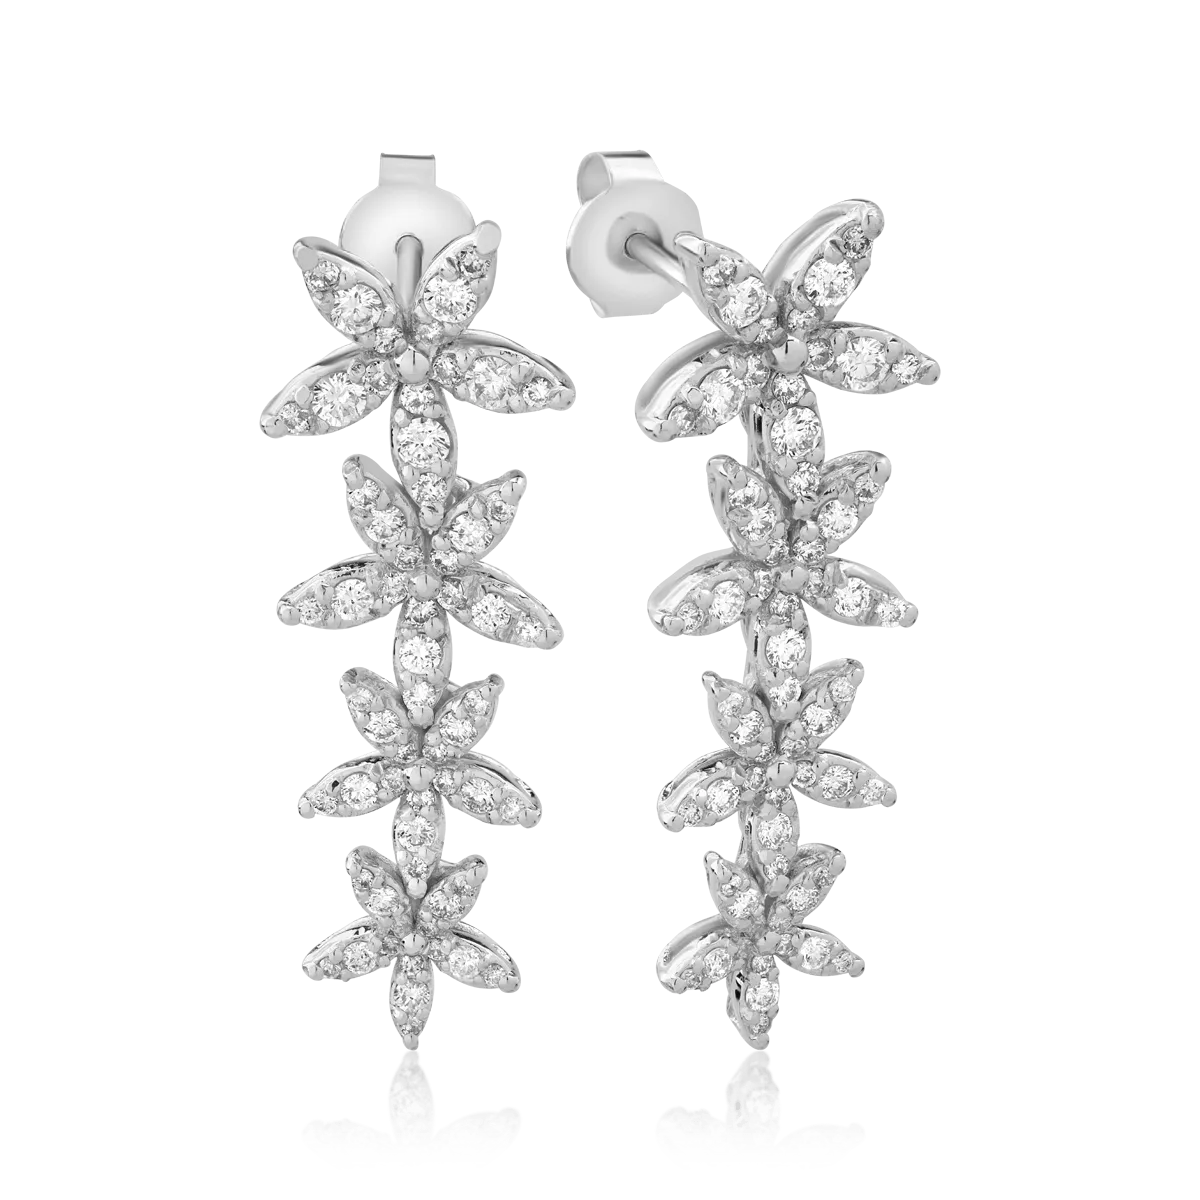 18K white gold earrings with 1.11ct diamonds